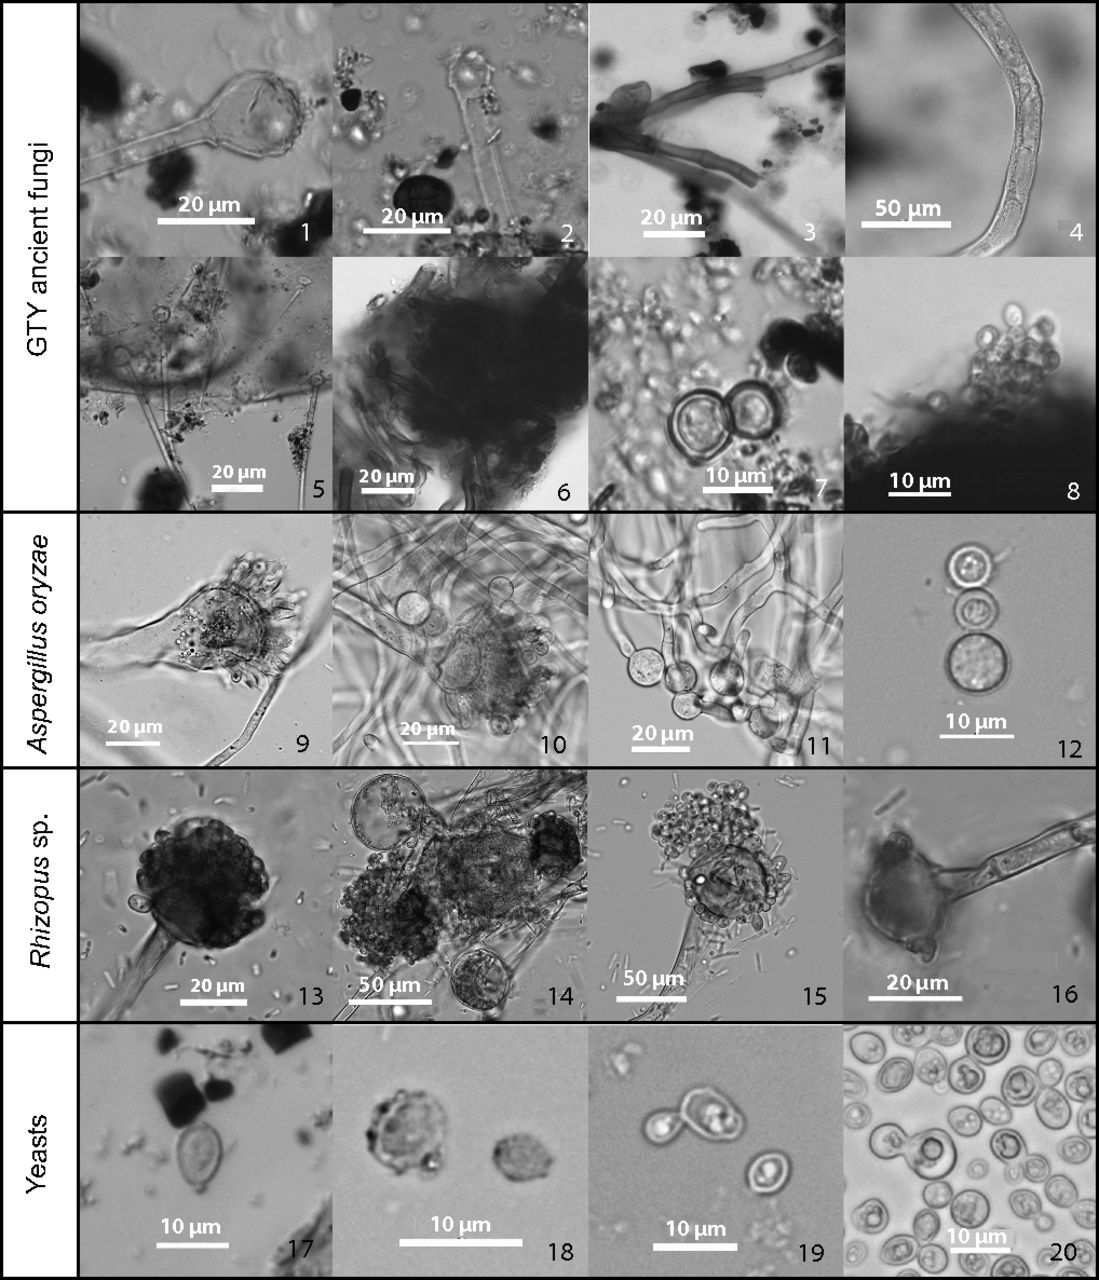 Several microscope images of fungal spores and yeast cells.